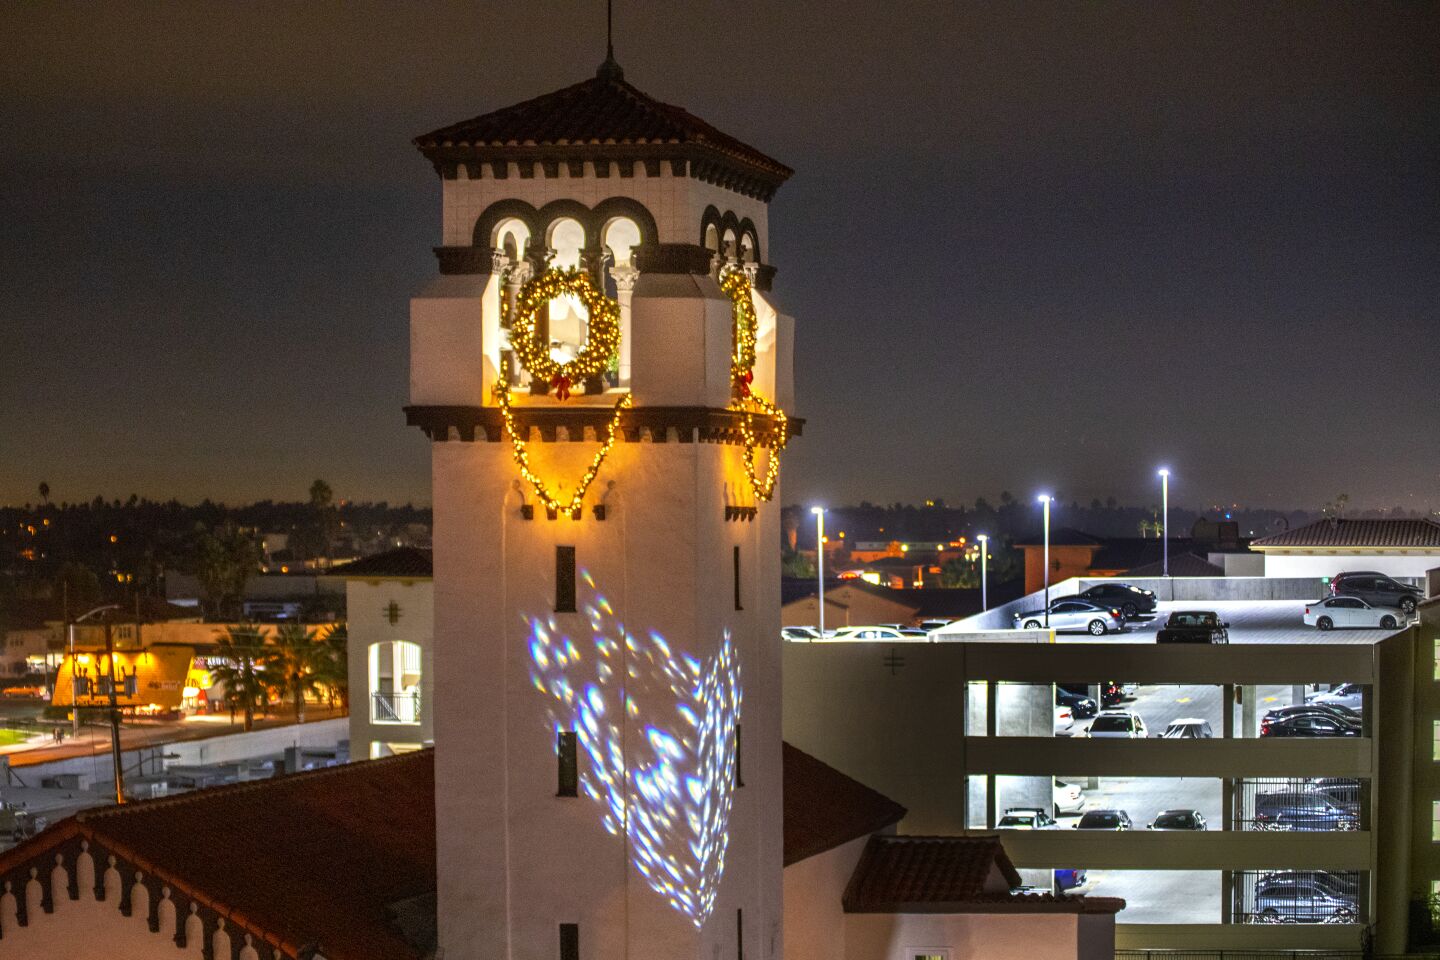 The 92-year-old bell tower at First United Methodist Church in Costa Mesa is lighted for the holidays Sunday night. It will be lighted every night through the end of the year.